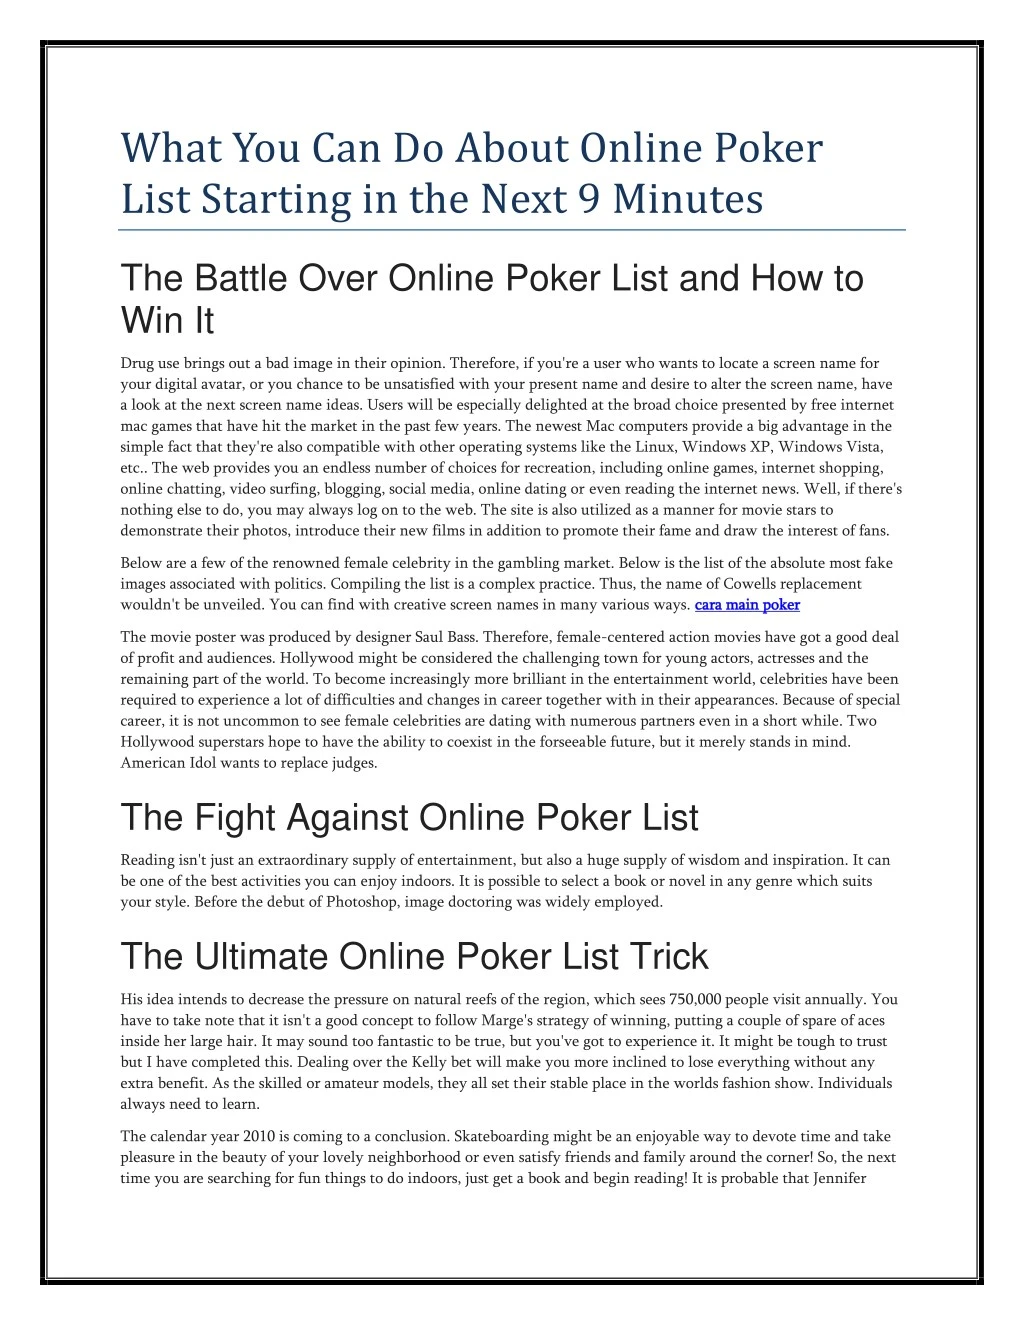 what you can do about online poker list starting